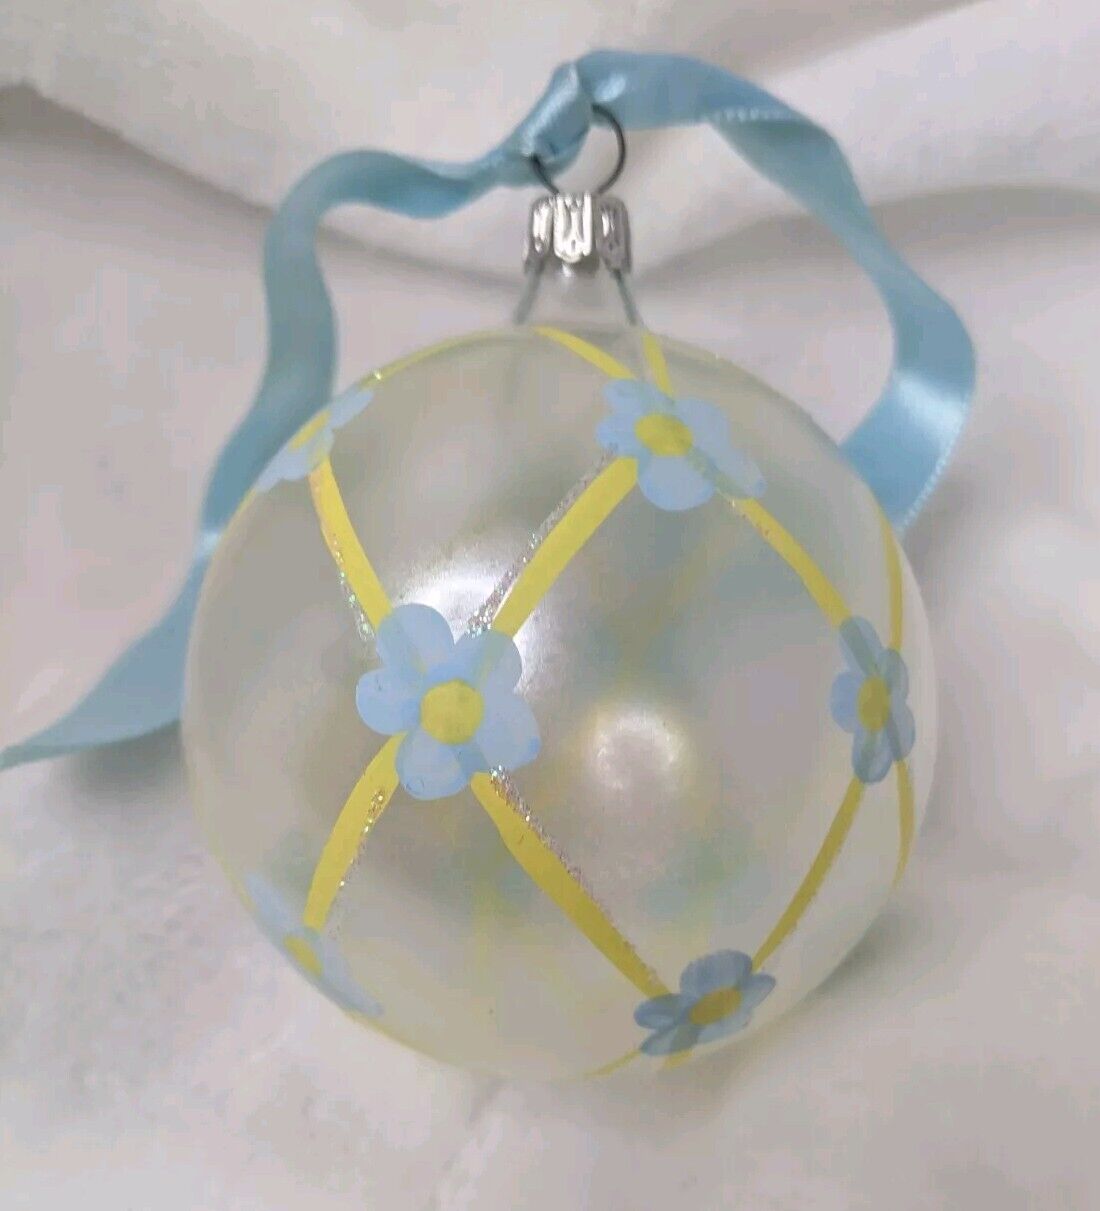 Vintage Glass Ball Ornament Frosted with Yellow and Blue Flowers 